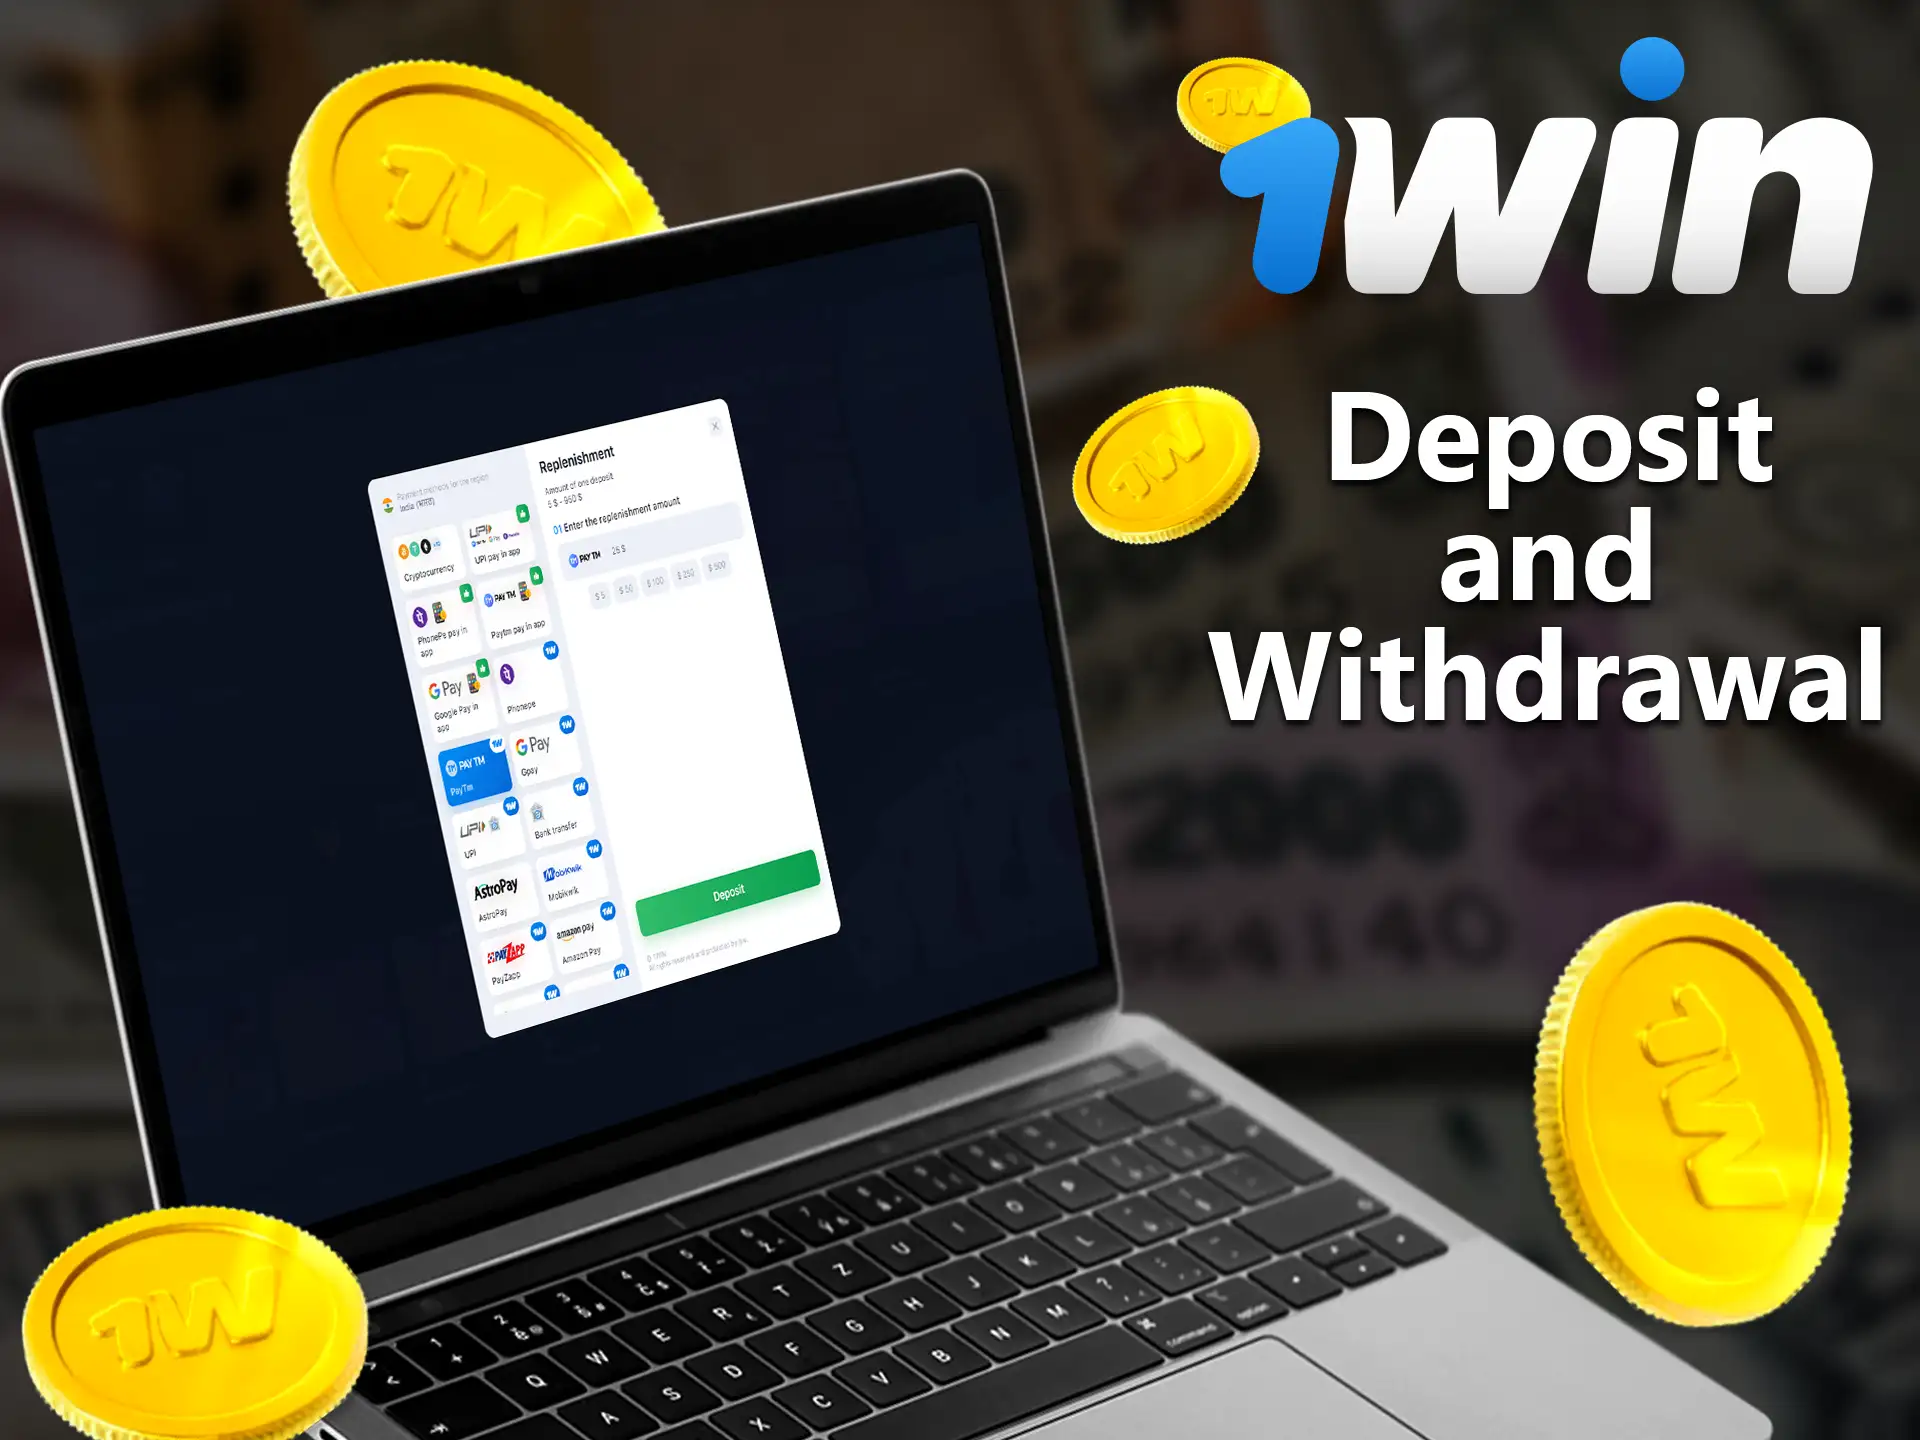 Here you can familiarize yourself with the list of deposit and withdrawal methods available at the 1Win website.